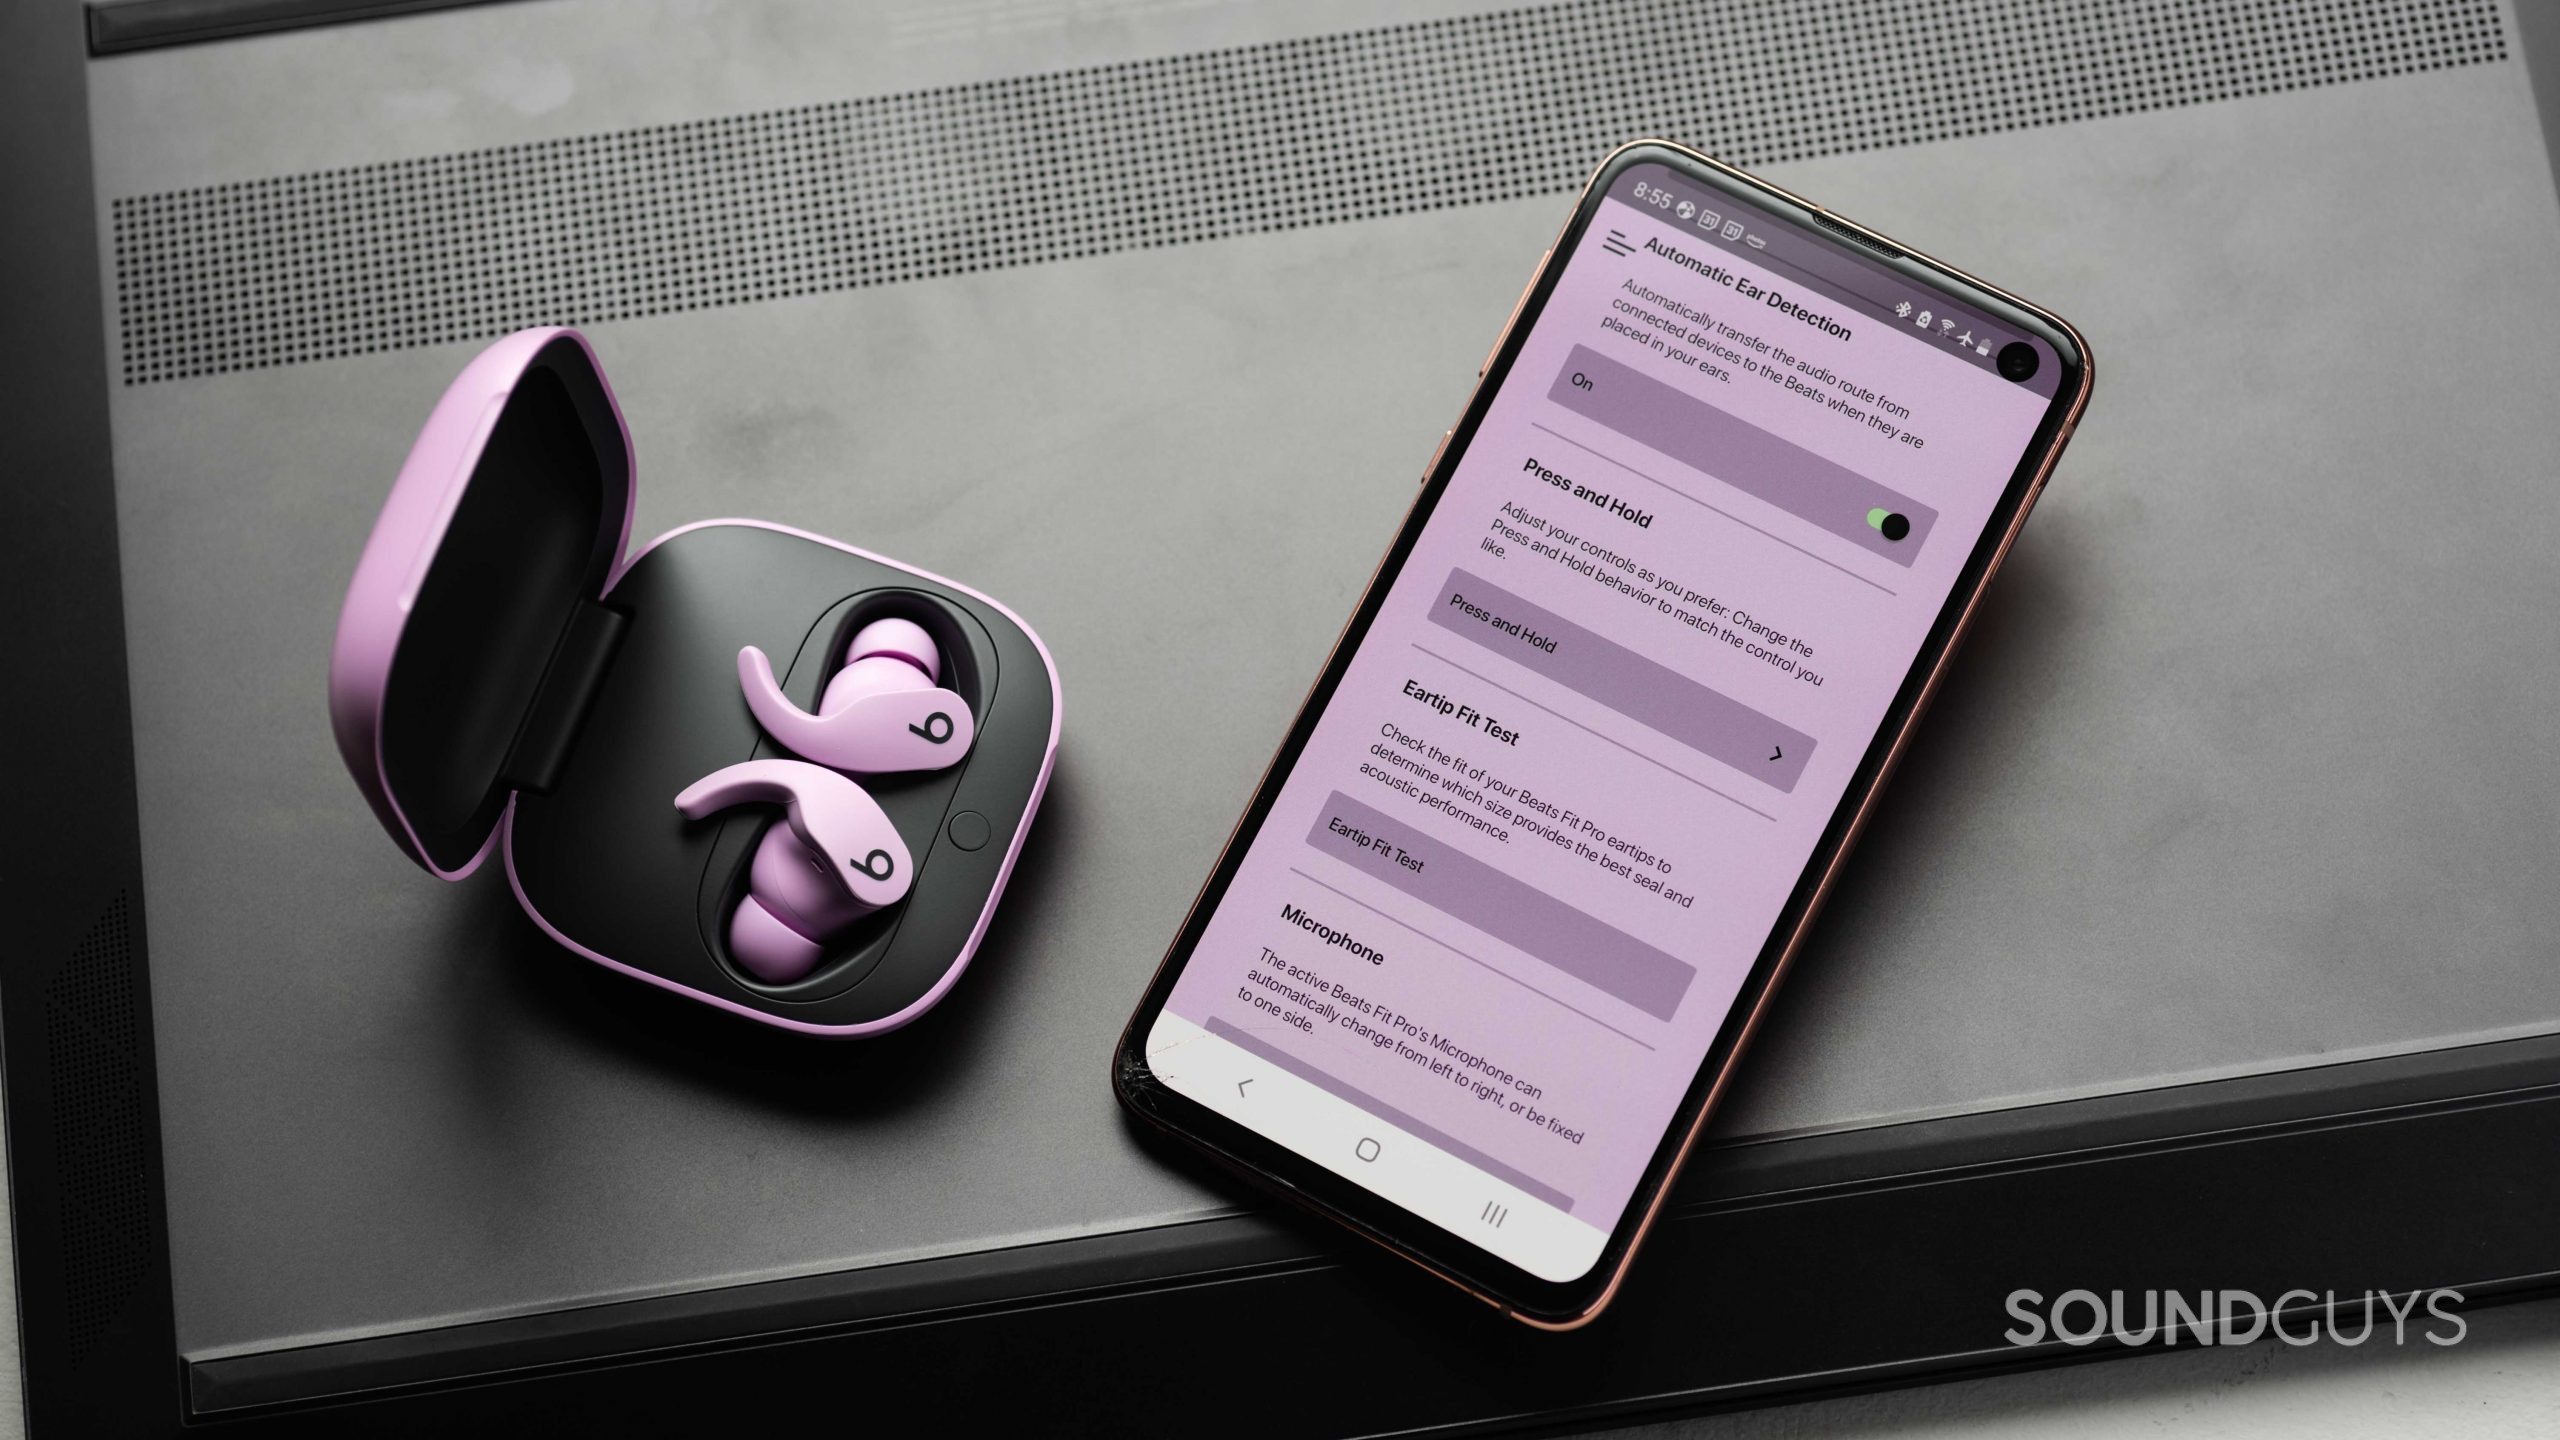 The Beats Fit Pro noise canceling true wireless earbuds in the open charging case and next to a Samsung Galaxy S10e with the Beats app open. The app has a purple tint to it, presumably to match the earphones.